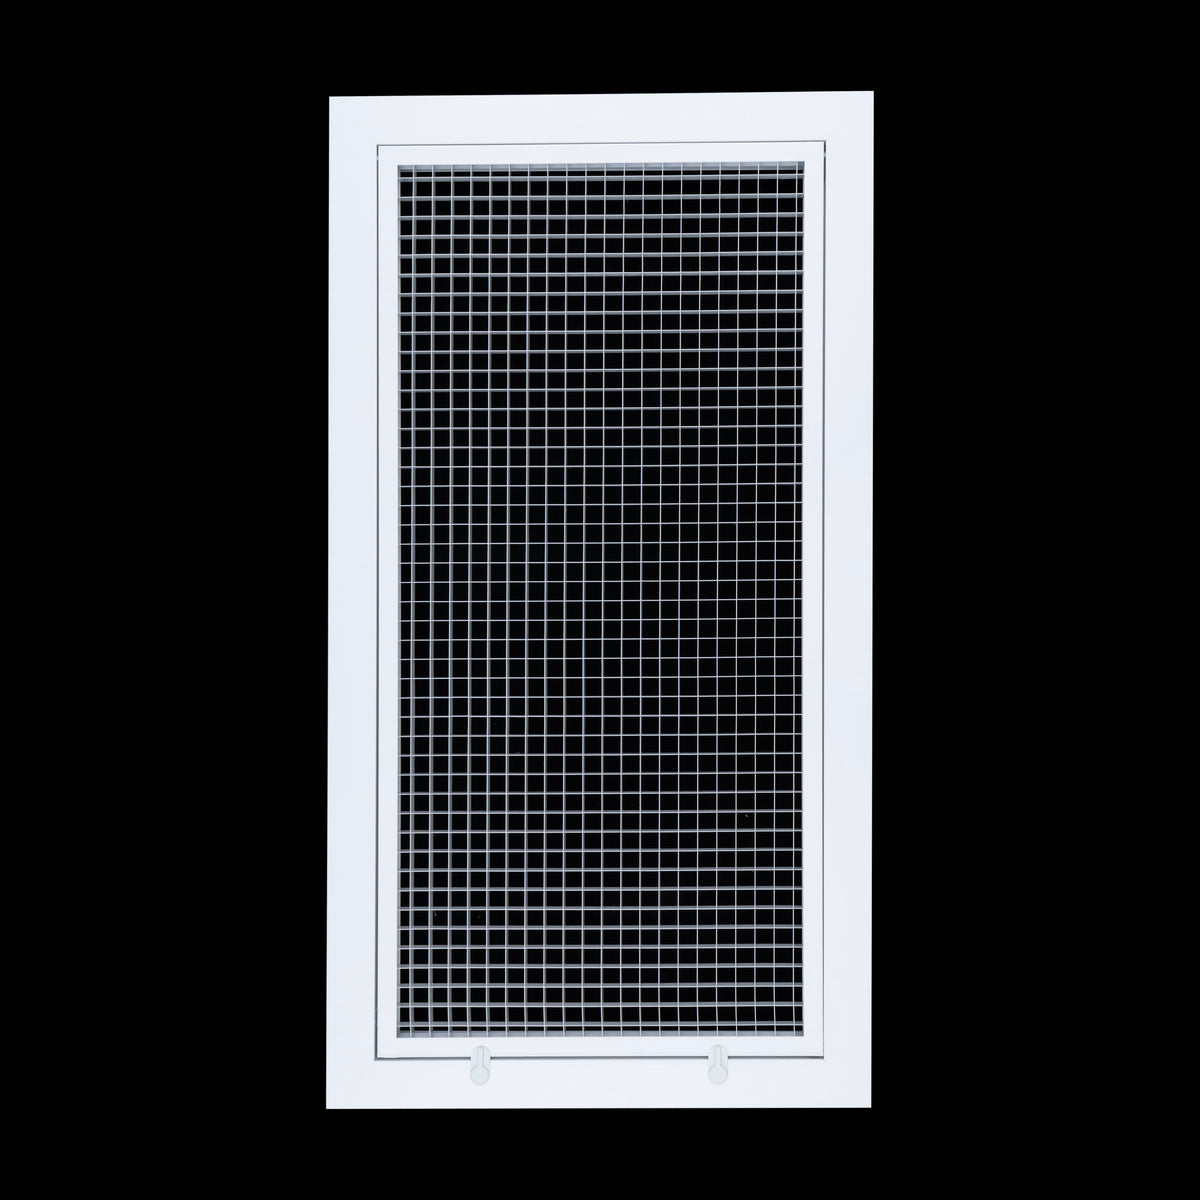 12" x 24" [Duct Opening] Aluminum Return Air Filter Grille | Rust Proof Eggcrate Vent Cover Grill for Sidewall and Ceiling, White | Outer Dimensions: 14.5" X 26.5"